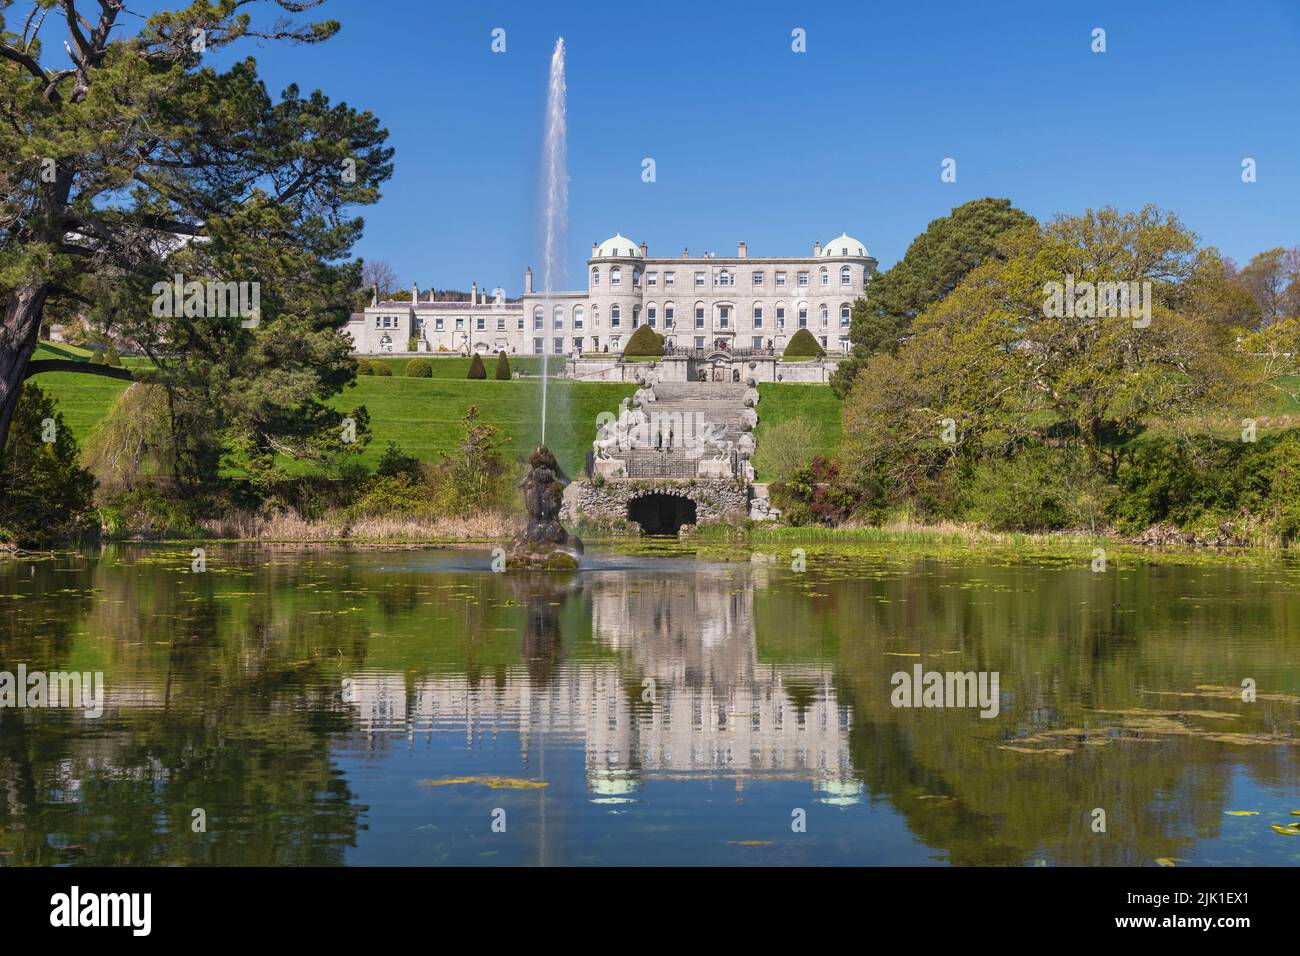 Ireland, County Wicklow, Enniskerry, Powerscourt Estate House and Gardens, Powerscourt House reflected in the Triton Lake with fountain shooting into the air. Stock Photo